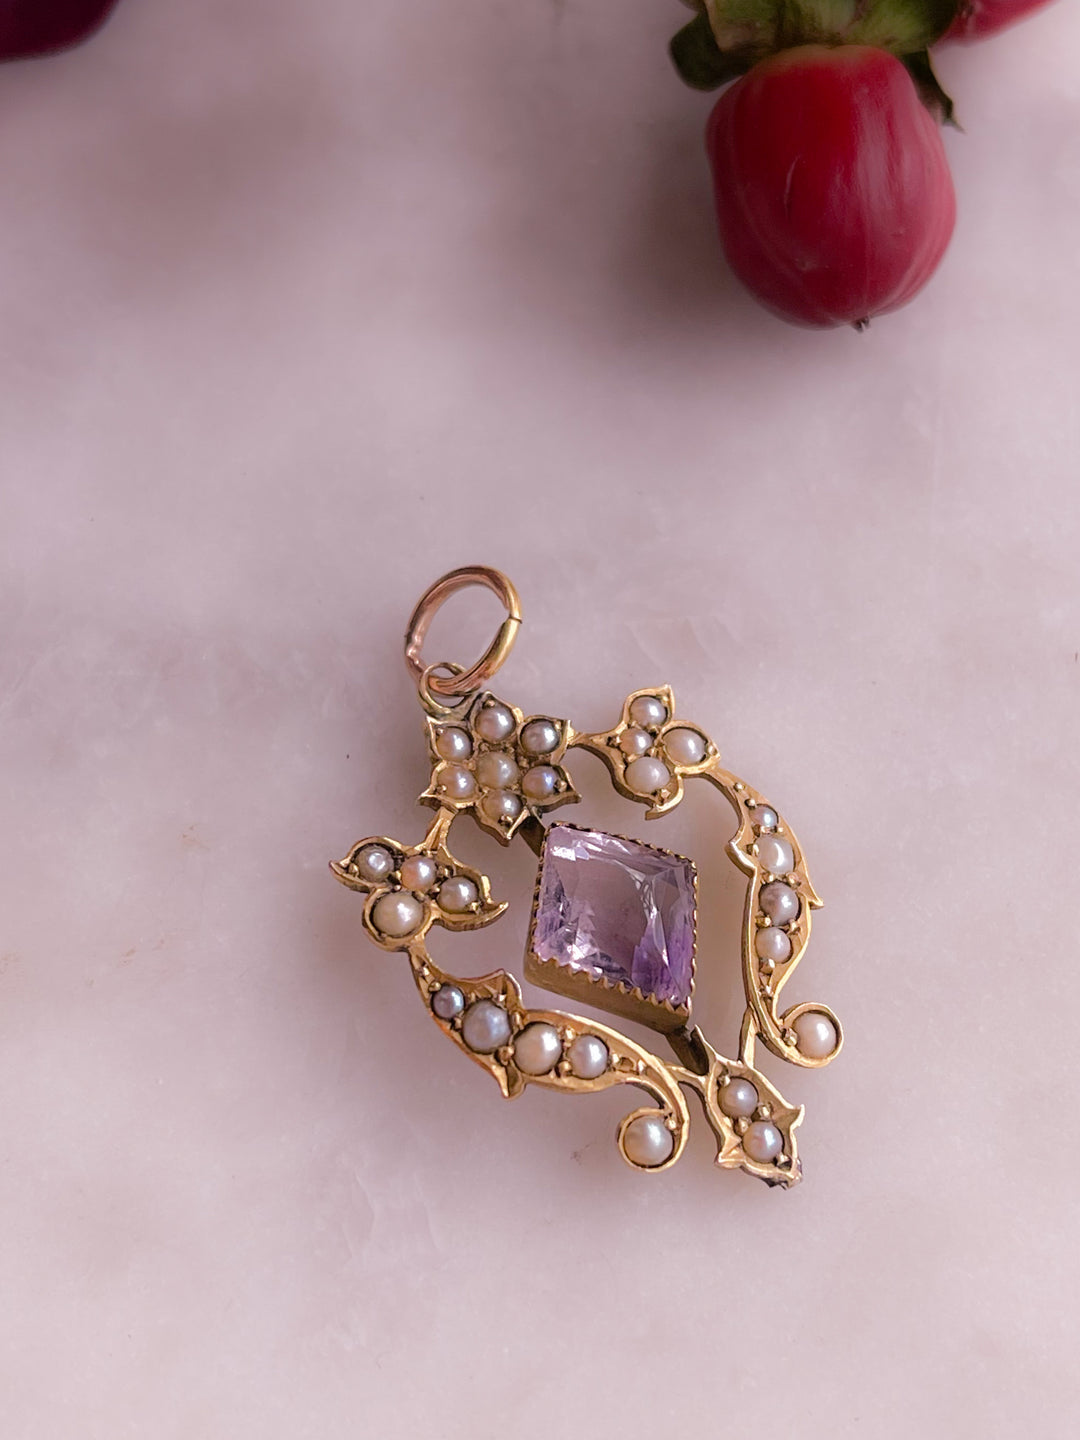 9k English Edwardian Lavaliere Pendant with Amethyst and Pearl (INCLUDE PINK STONE LAVALIER PEARL PENDANT)